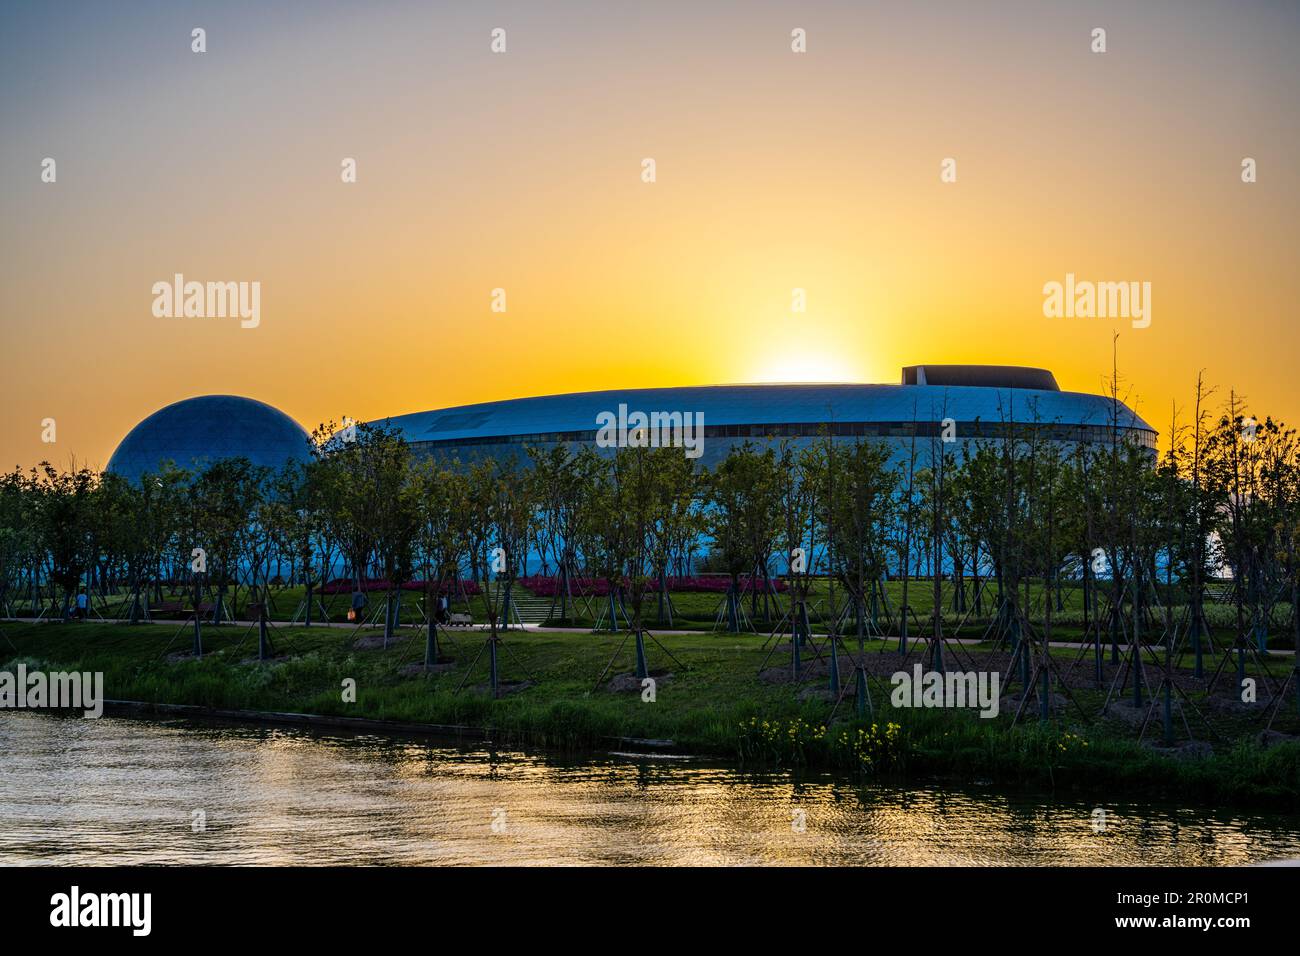 The setting sun goes behind the Shanghai Astronomy Museum in Lingang, Pudong New Area, Shanghai, China. Stock Photo